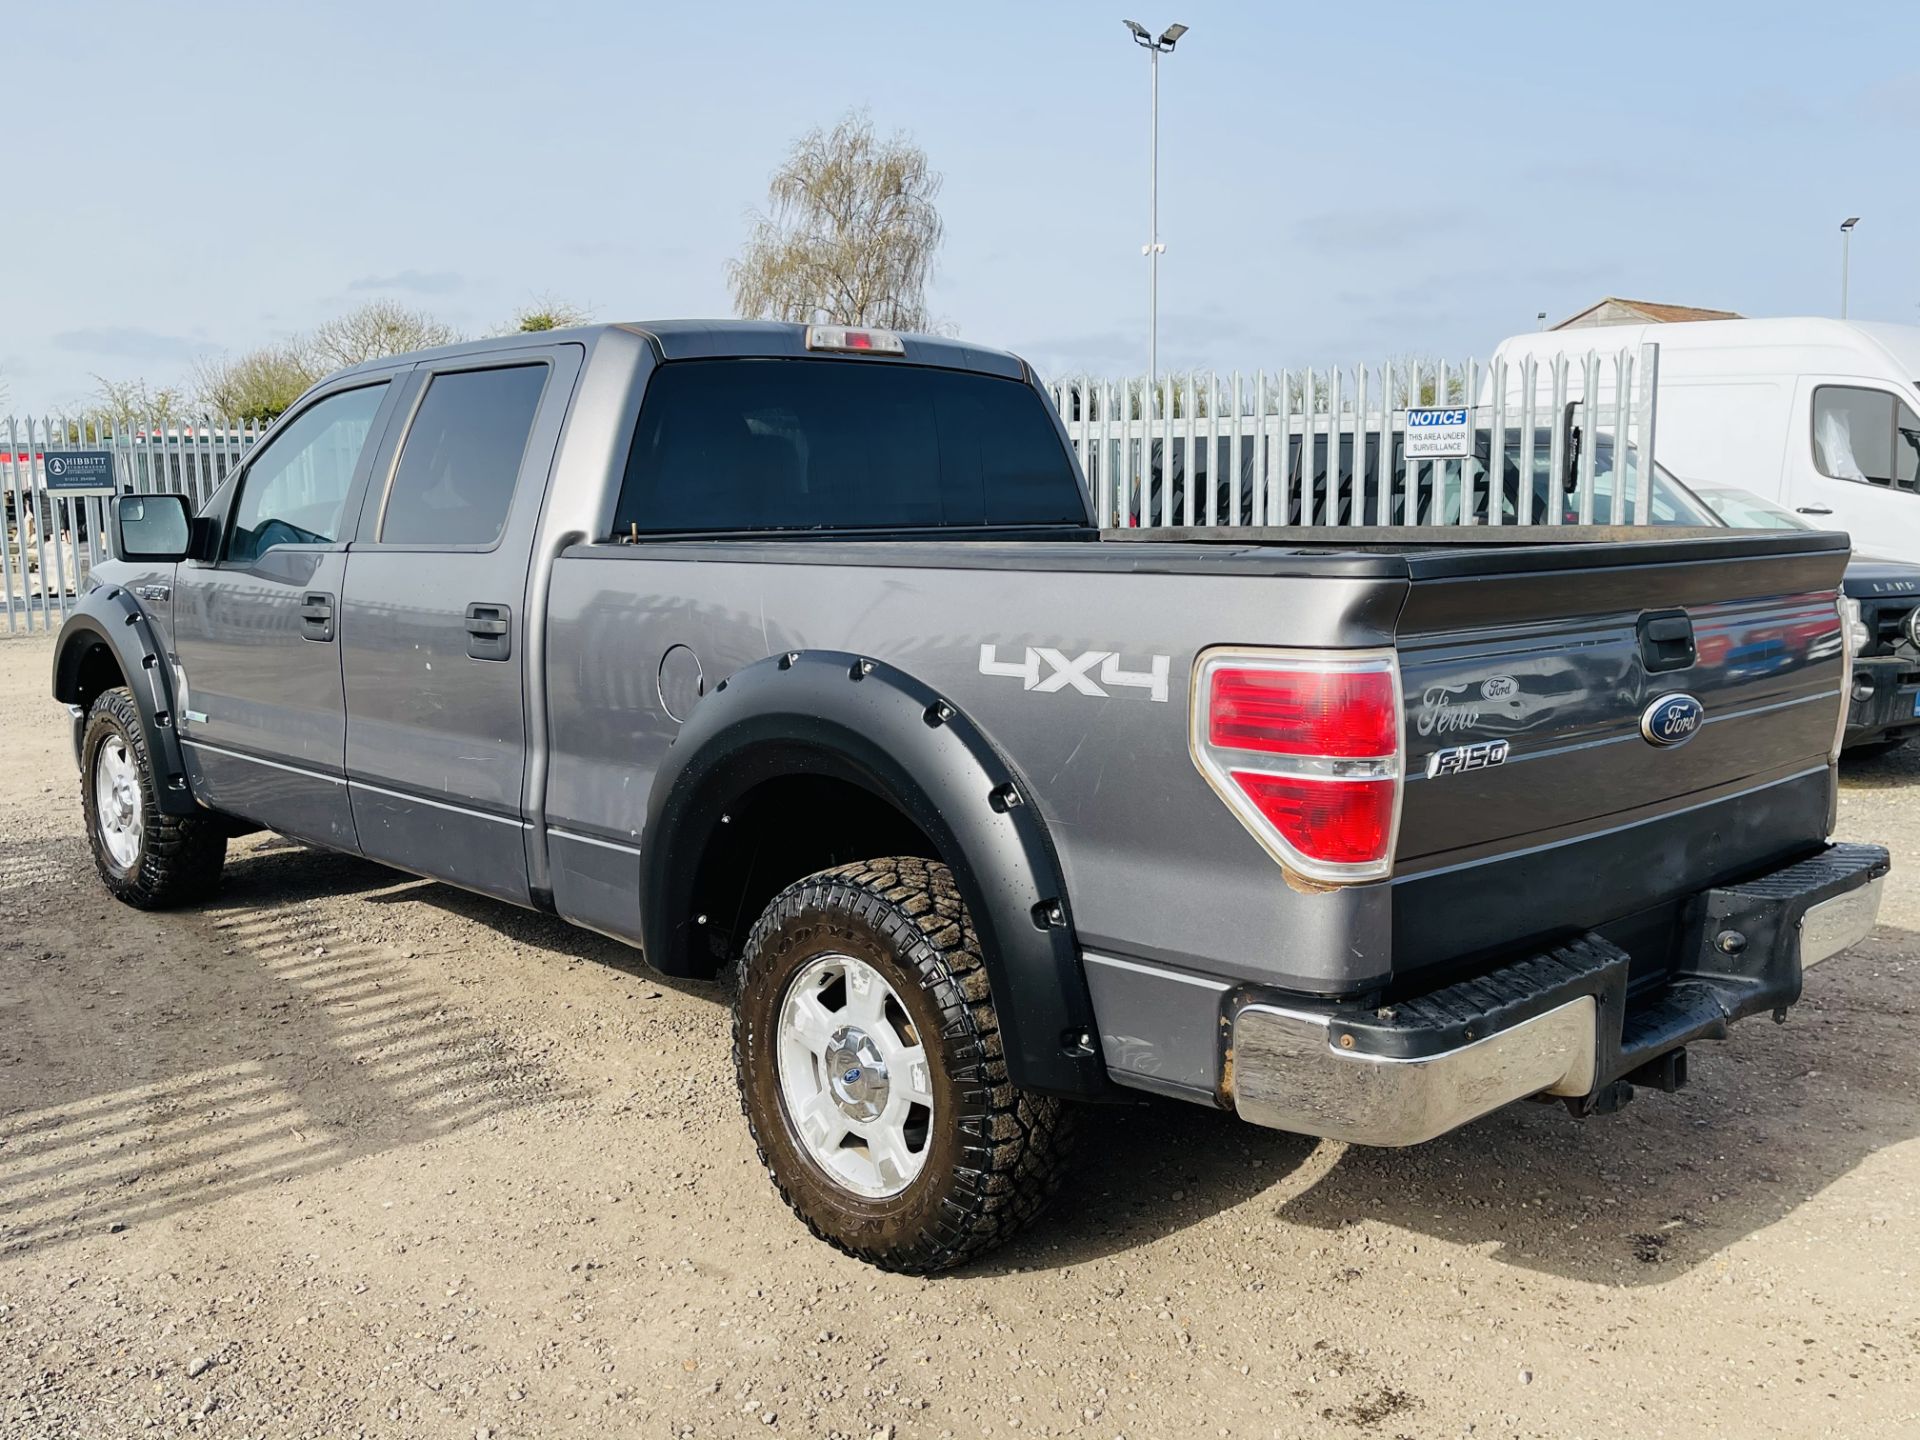 Ford F-150 XLT Edition 3.5L V6 Eco-boost Super-Crew 4x4 - '2012 Year' - Air Con - No Vat save 20% - Image 7 of 25